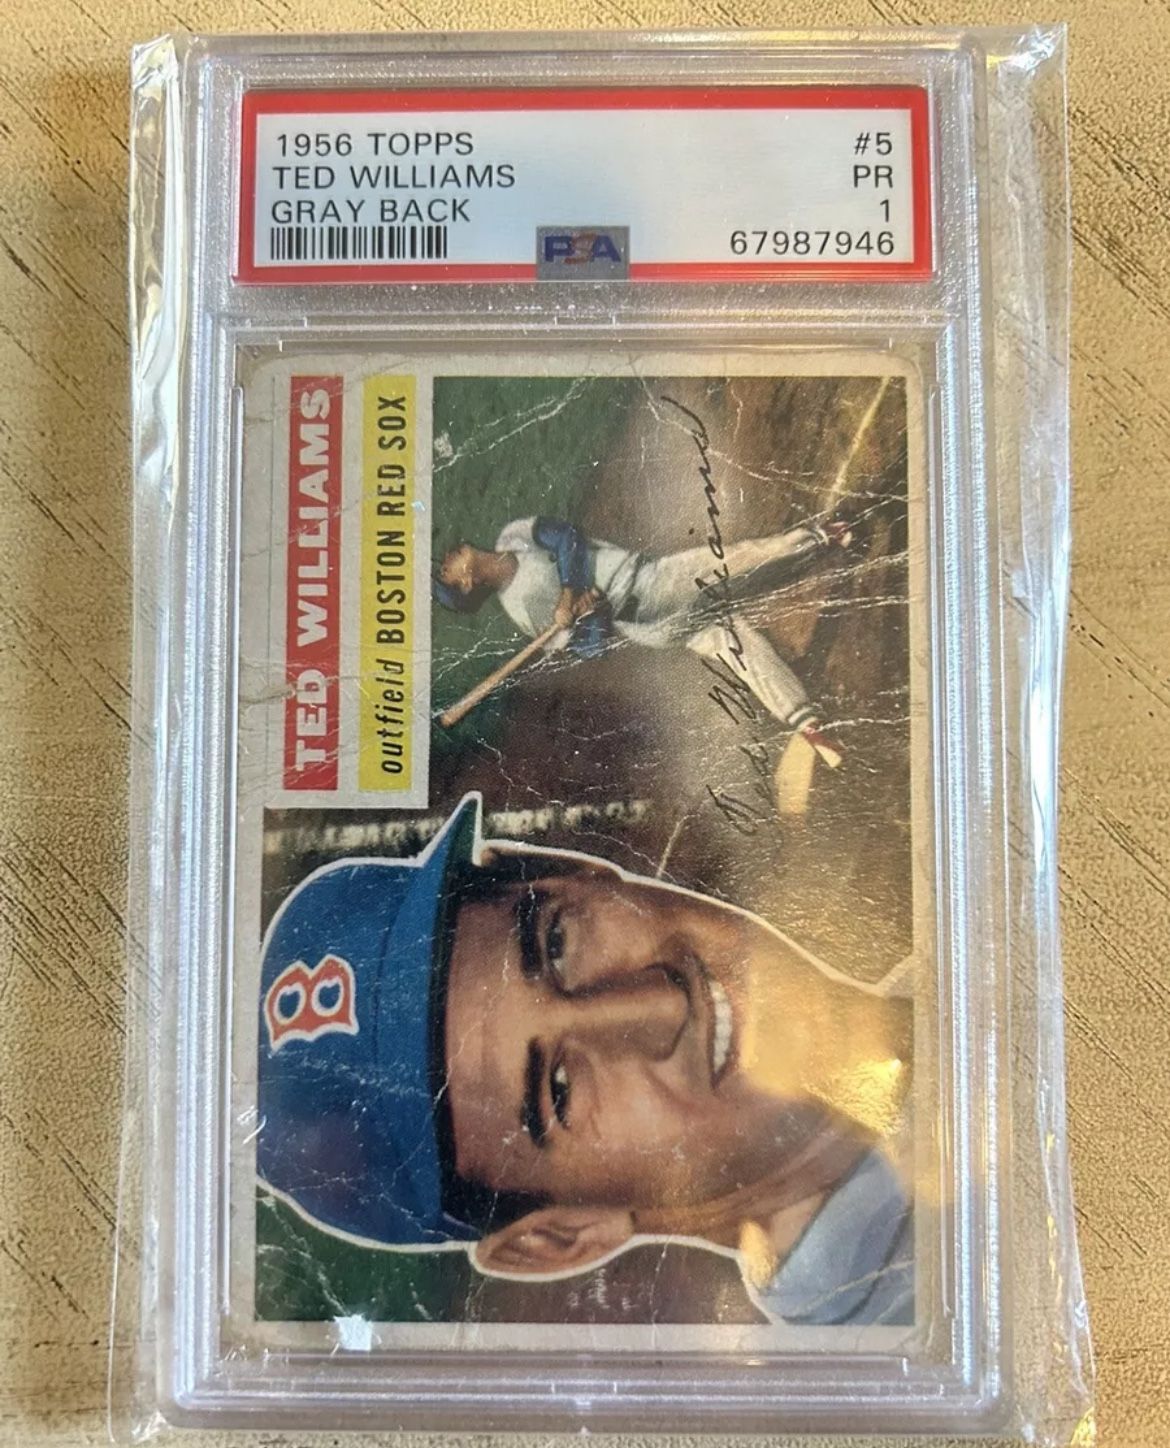 1956 Topps Ted Williams Gray back #5 PSA 1